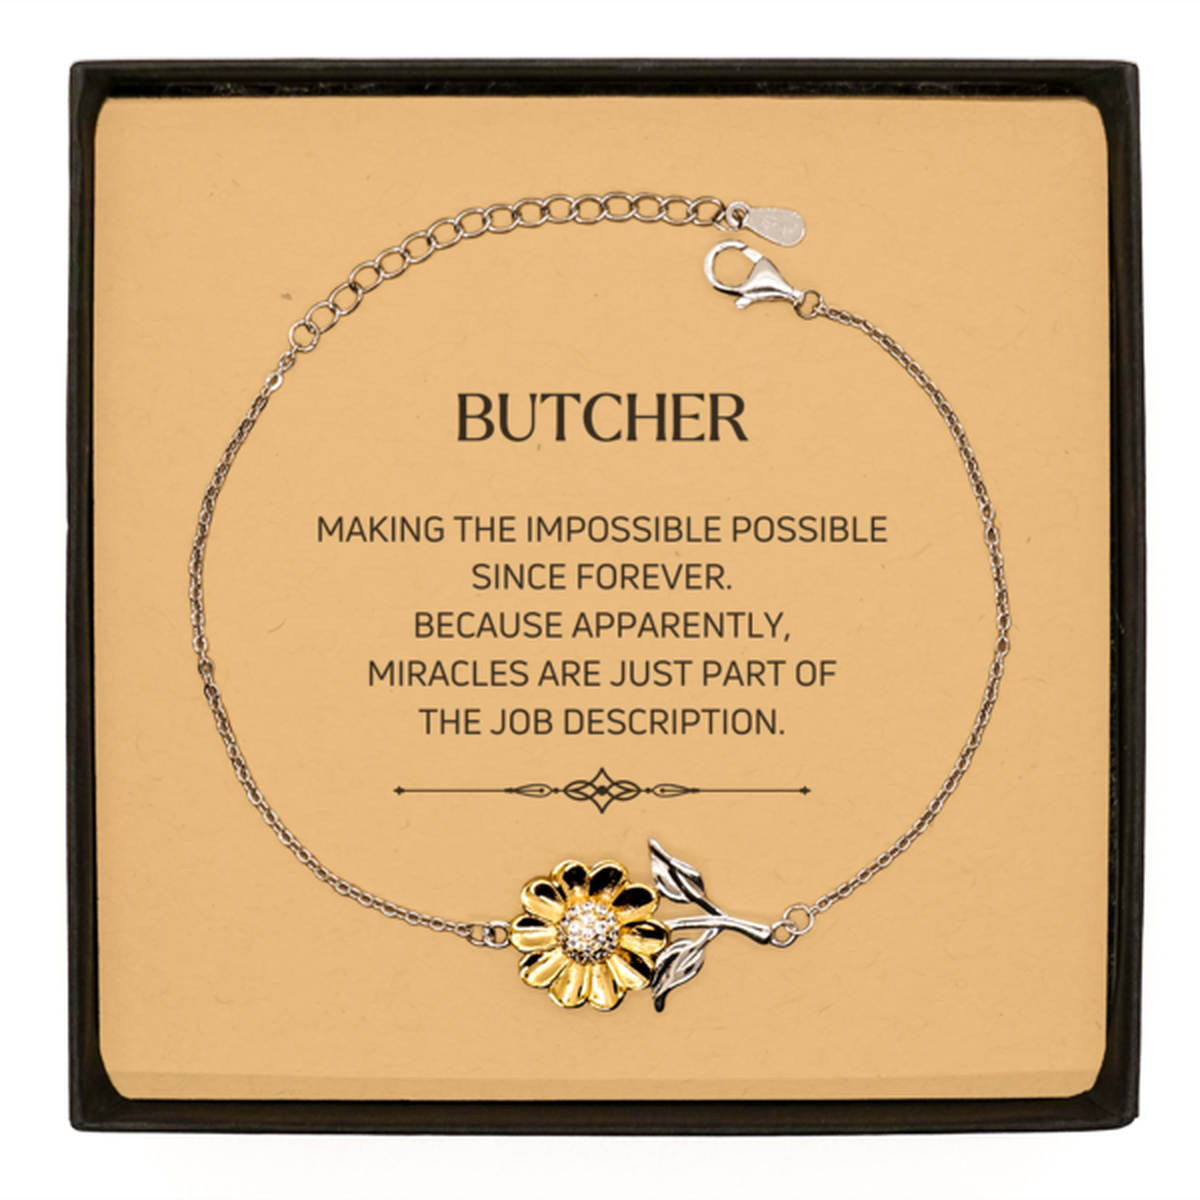 Funny Butcher Gifts, Miracles are just part of the job description, Inspirational Birthday Sunflower Bracelet For Butcher, Men, Women, Coworkers, Friends, Boss